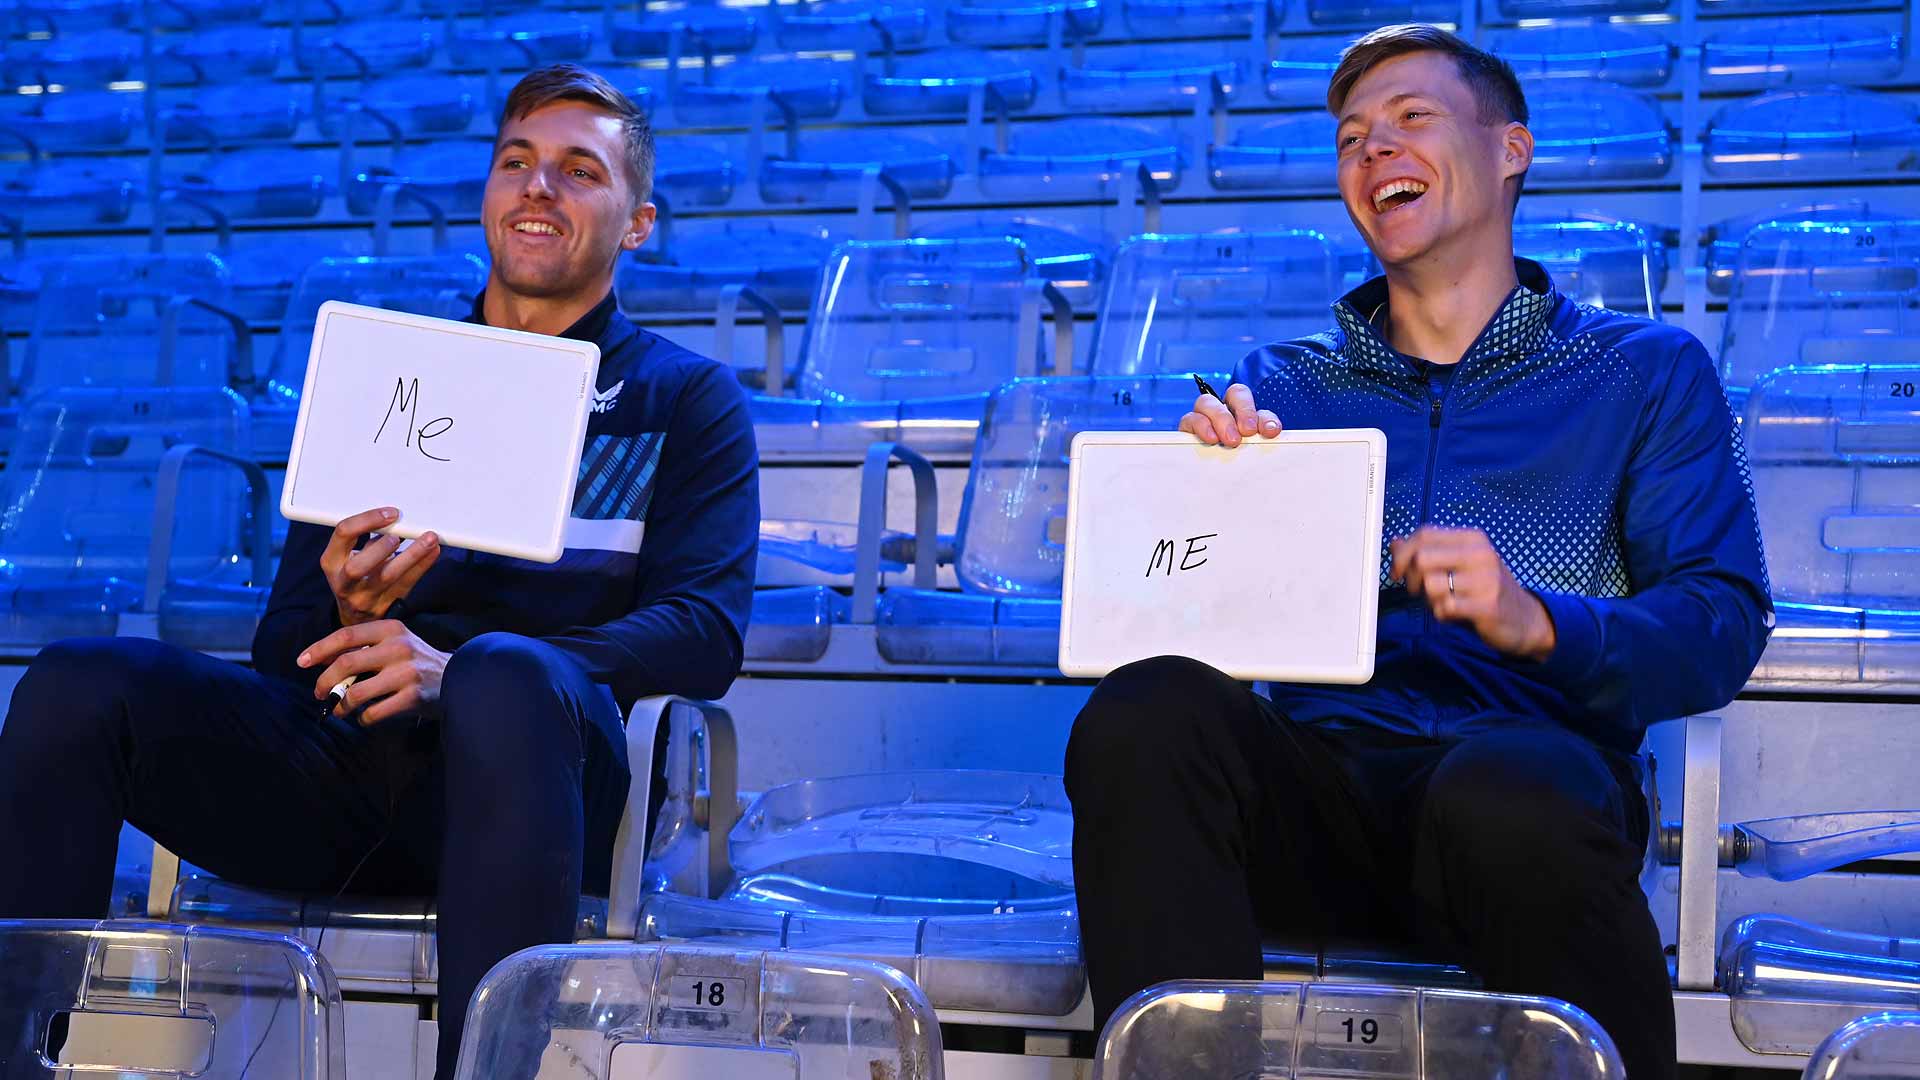 Lloyd Glasspool and Harri Heliovaara share a laugh on Saturday at the Nitto ATP Finals media day.